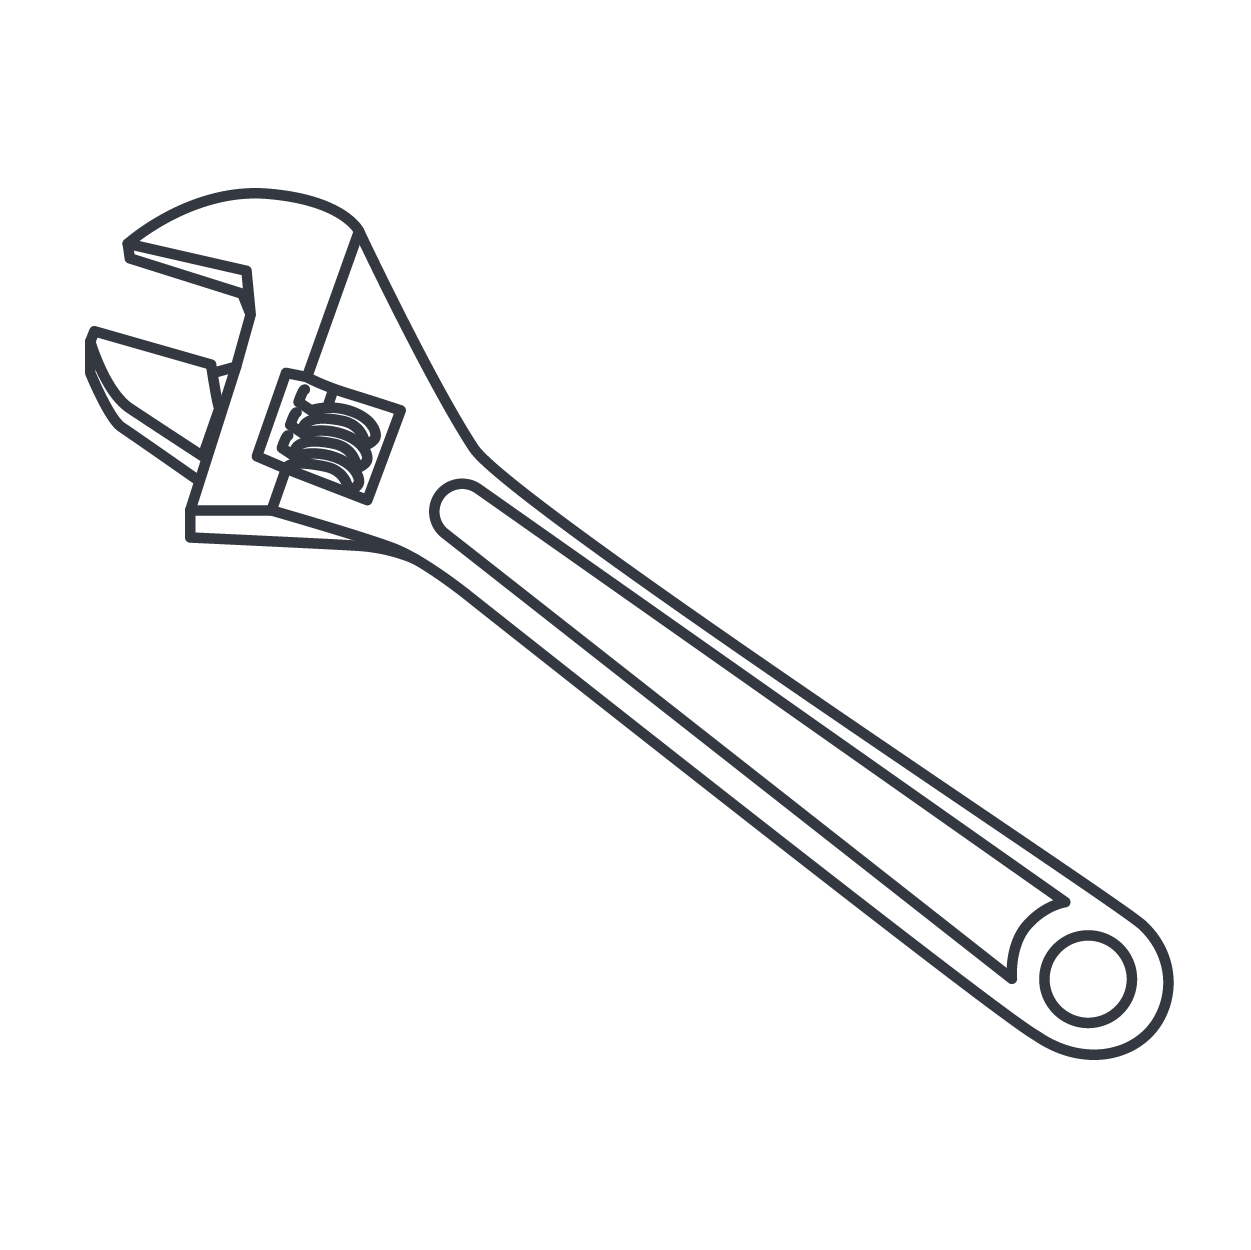 TS-Tool-Illustrations_Adjustable-wrench.png